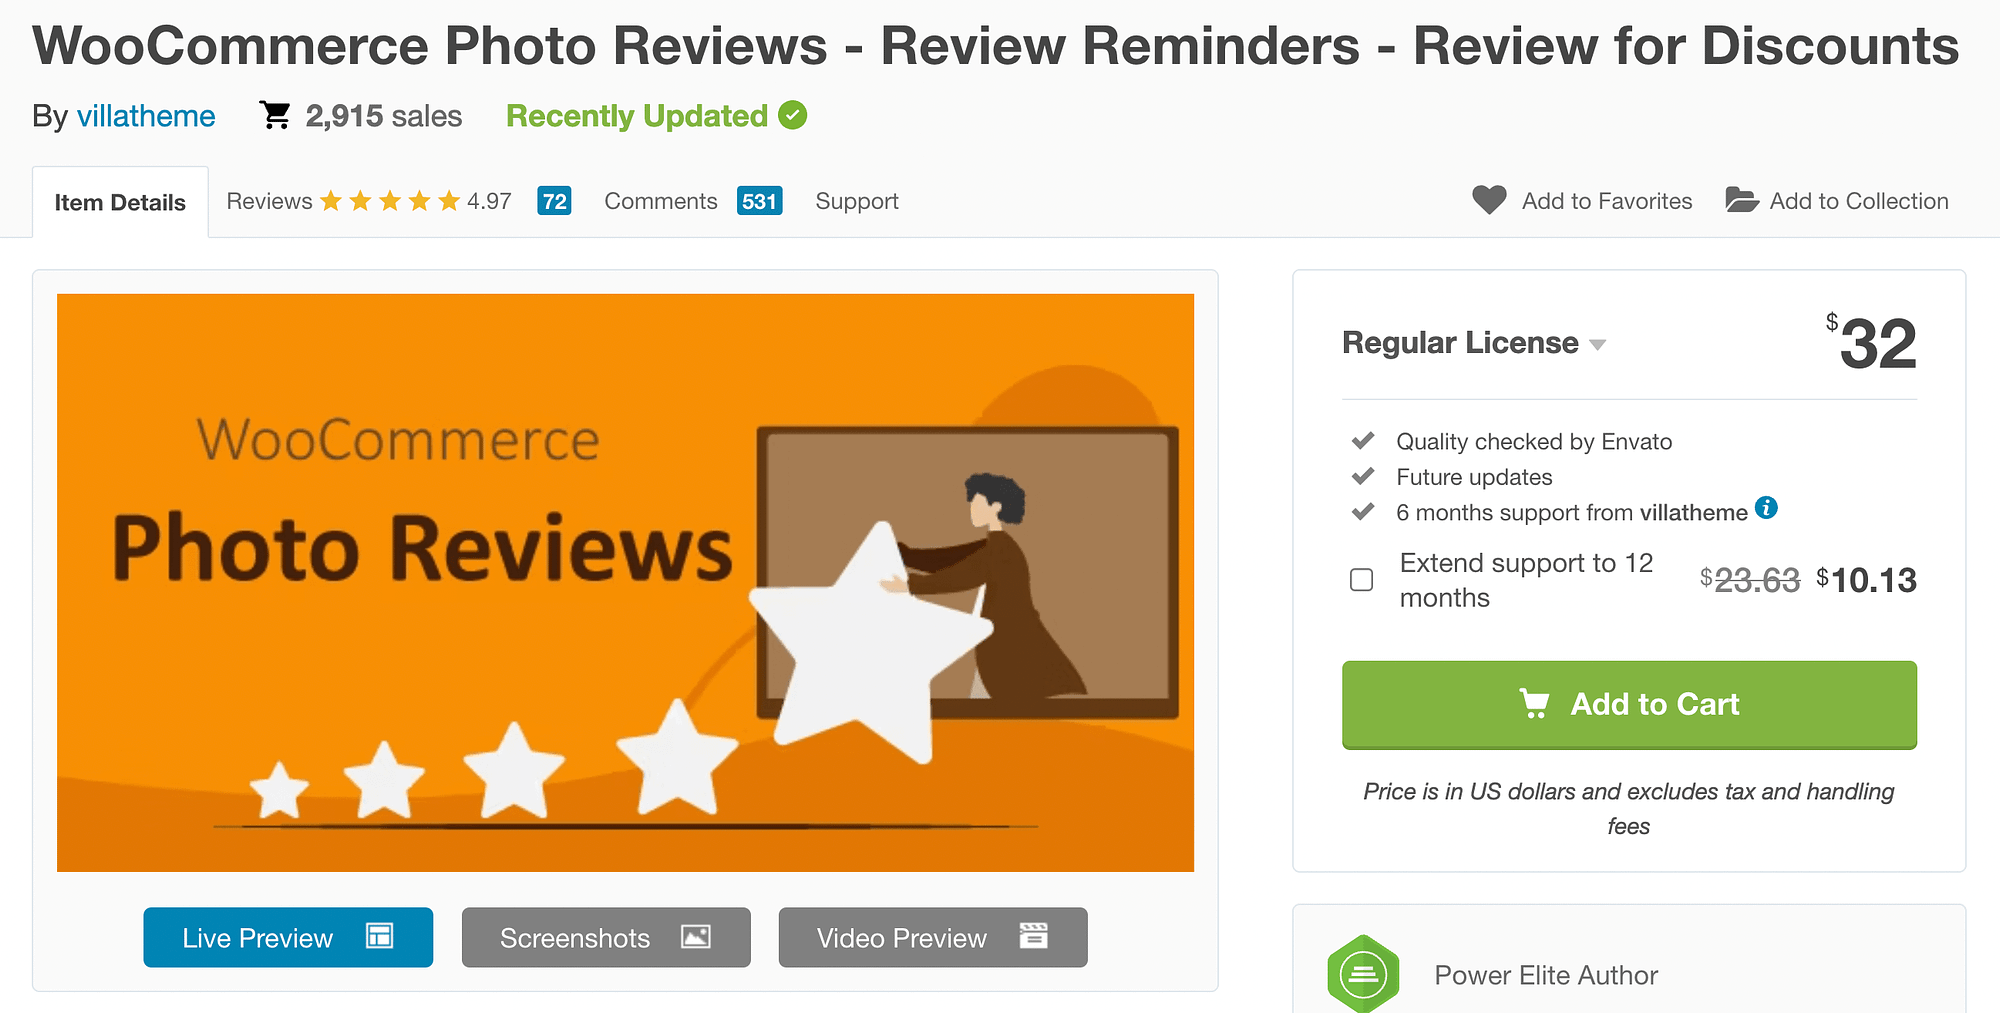 The WooCommerce Photo Reviews plugin to import Amazon reviews to WooCommerce.